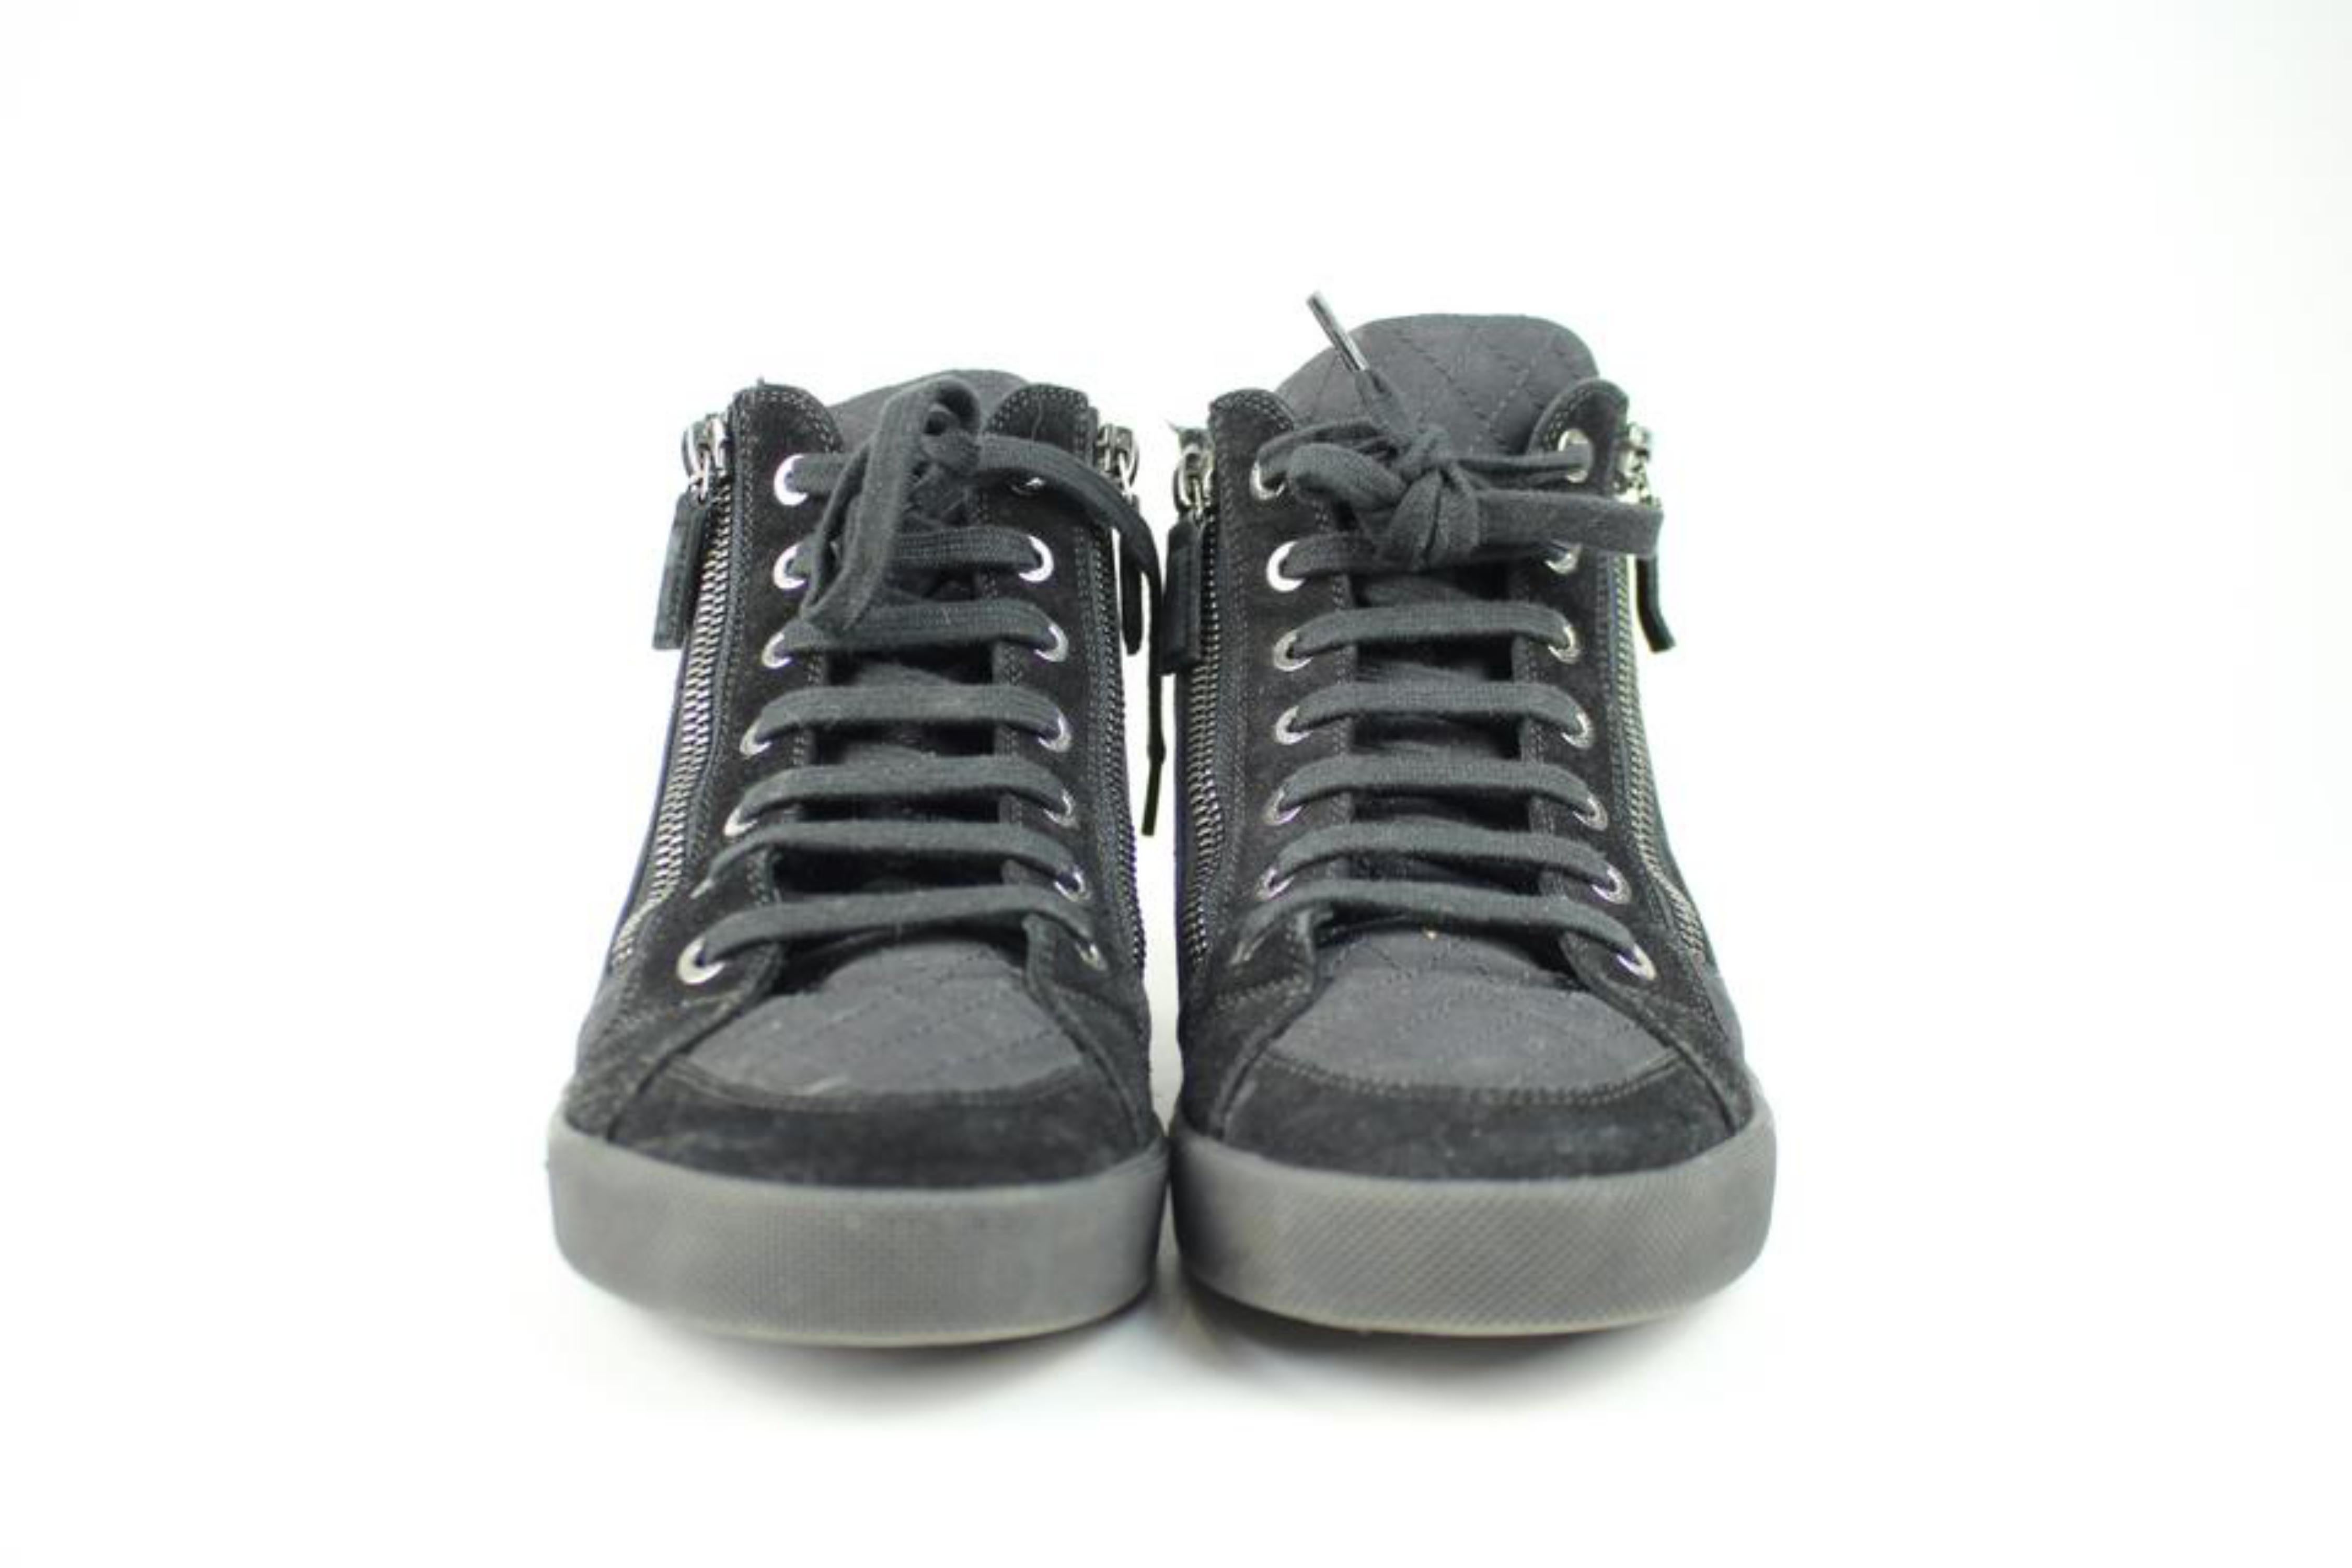 Chanel Black Quilted Cc High Top Sneakers 32cca3917 Sneakers In Fair Condition For Sale In Forest Hills, NY